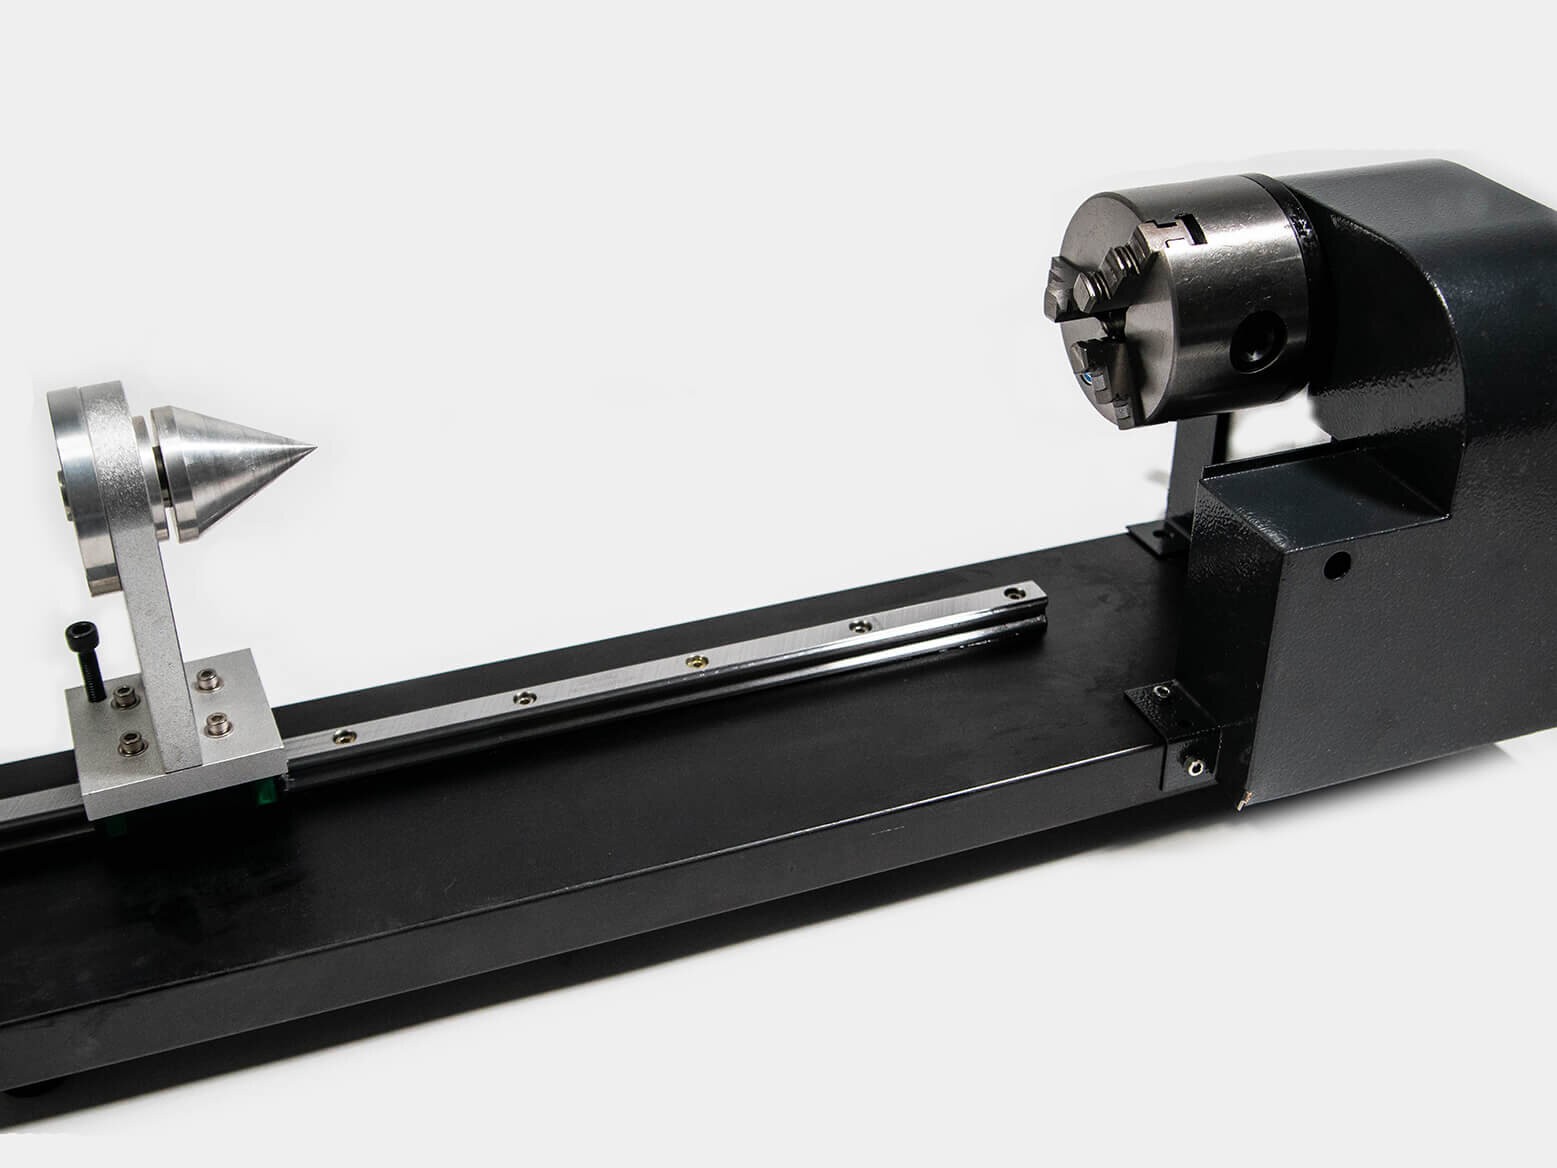 Co2 Laser Cutter/Engraver Rotary Attachment